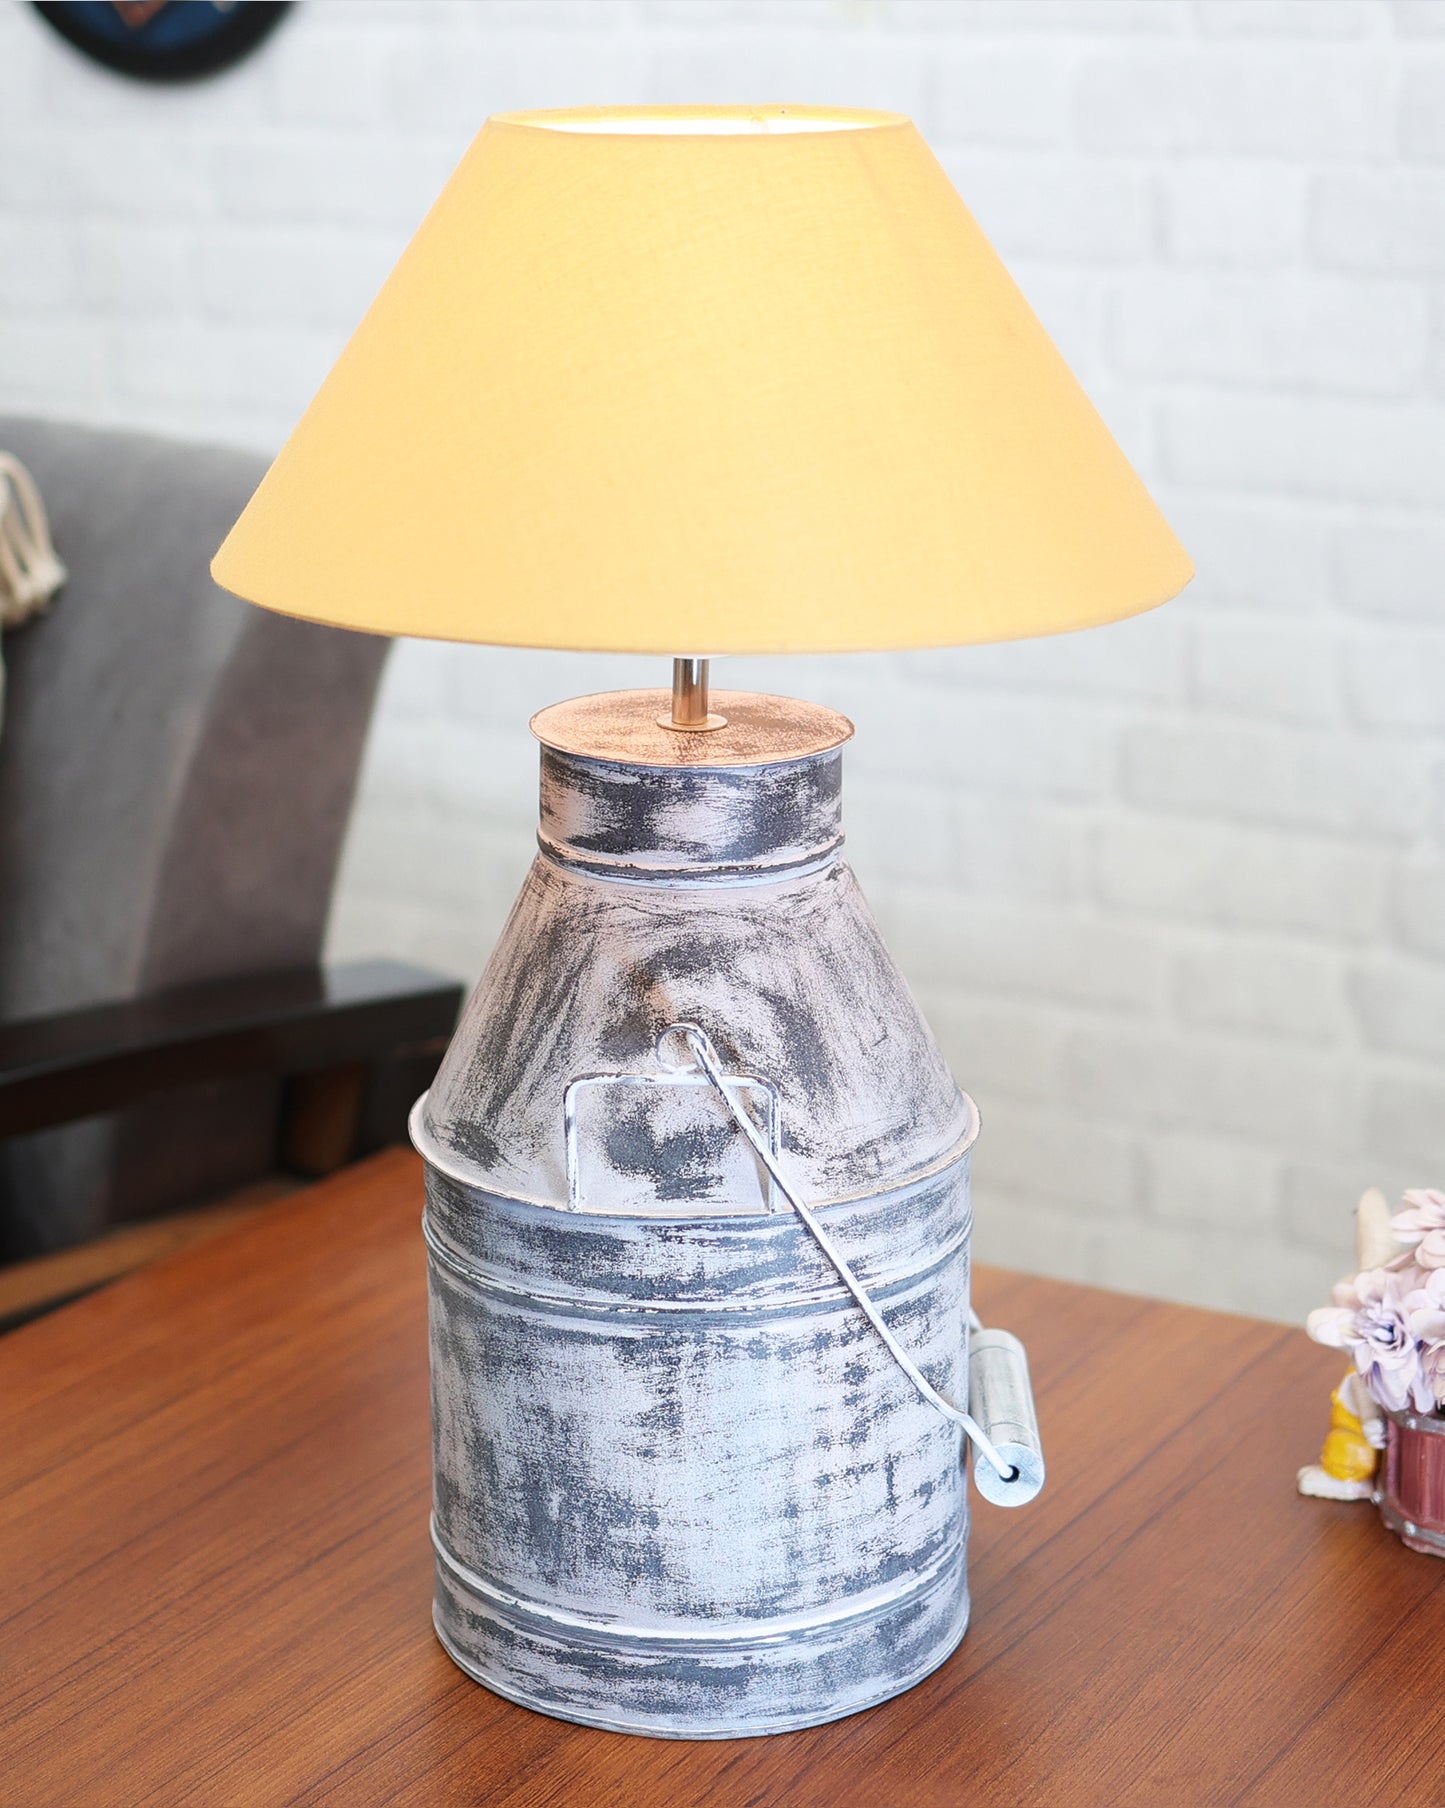 Rustic Milk Churn Can Table Lamp with cone shade, Whitewash Finish